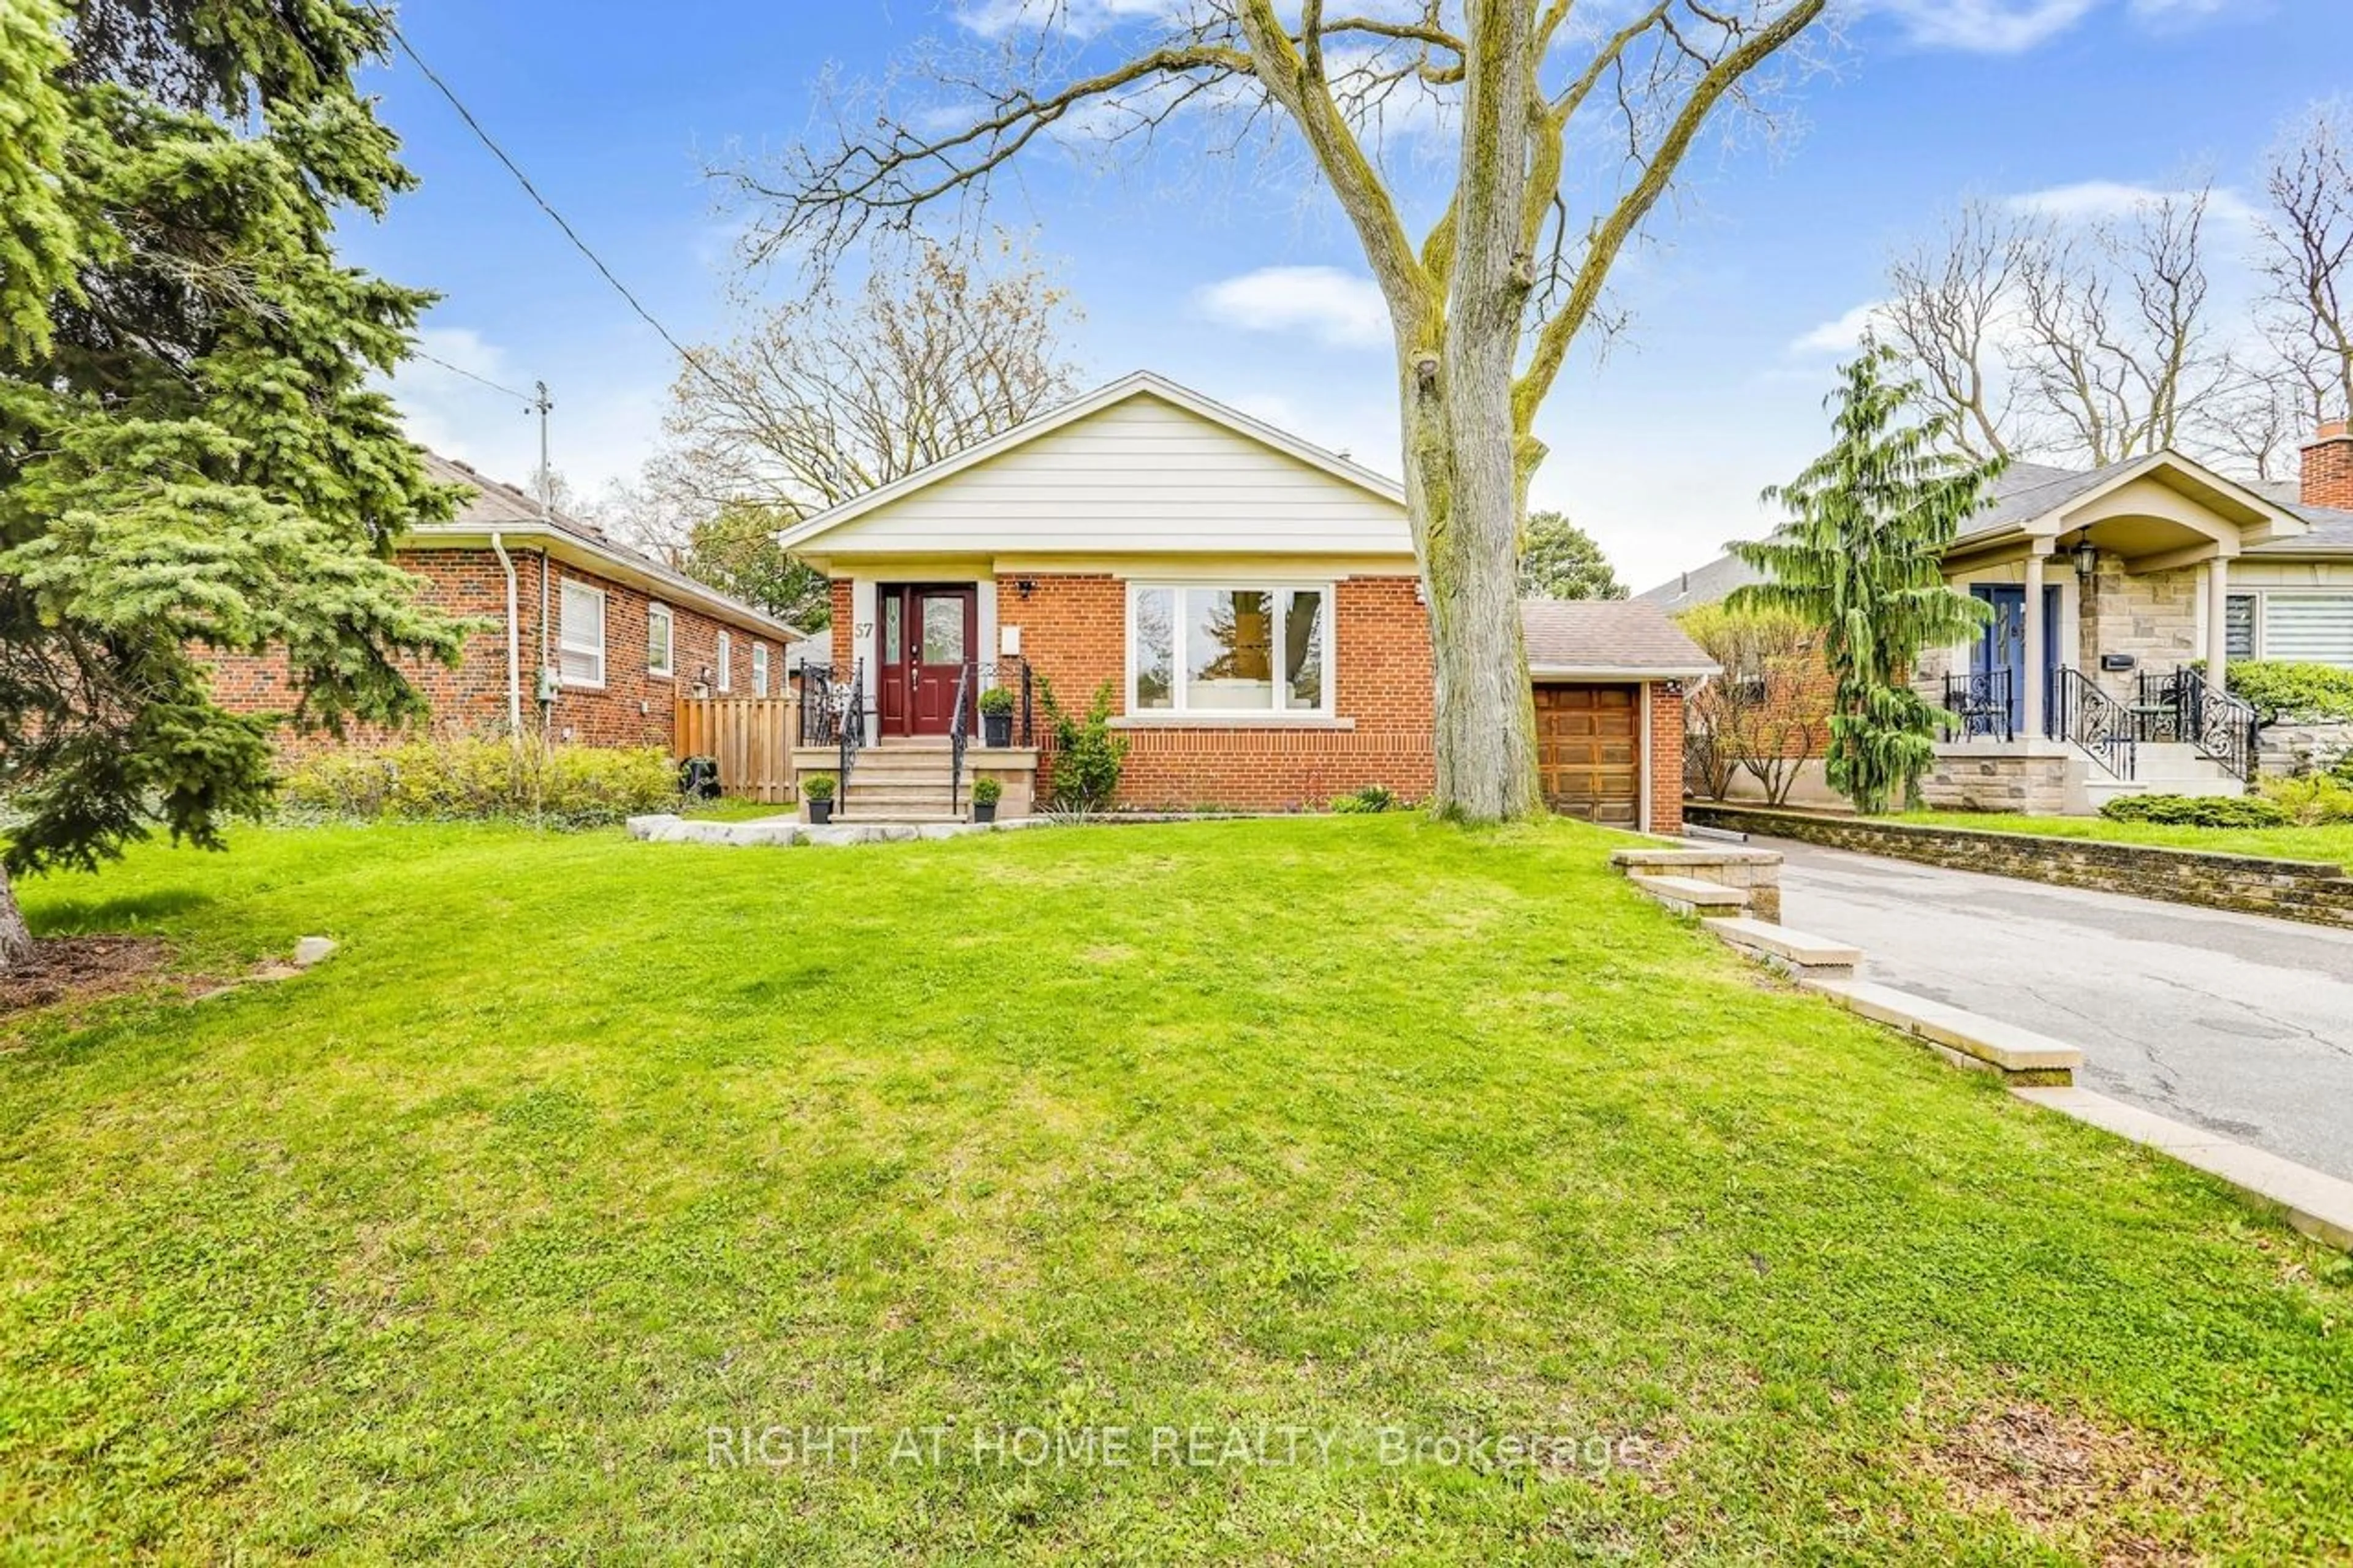 Home with brick exterior material for 57 Beaverbrook Ave, Toronto Ontario M9B 2N5